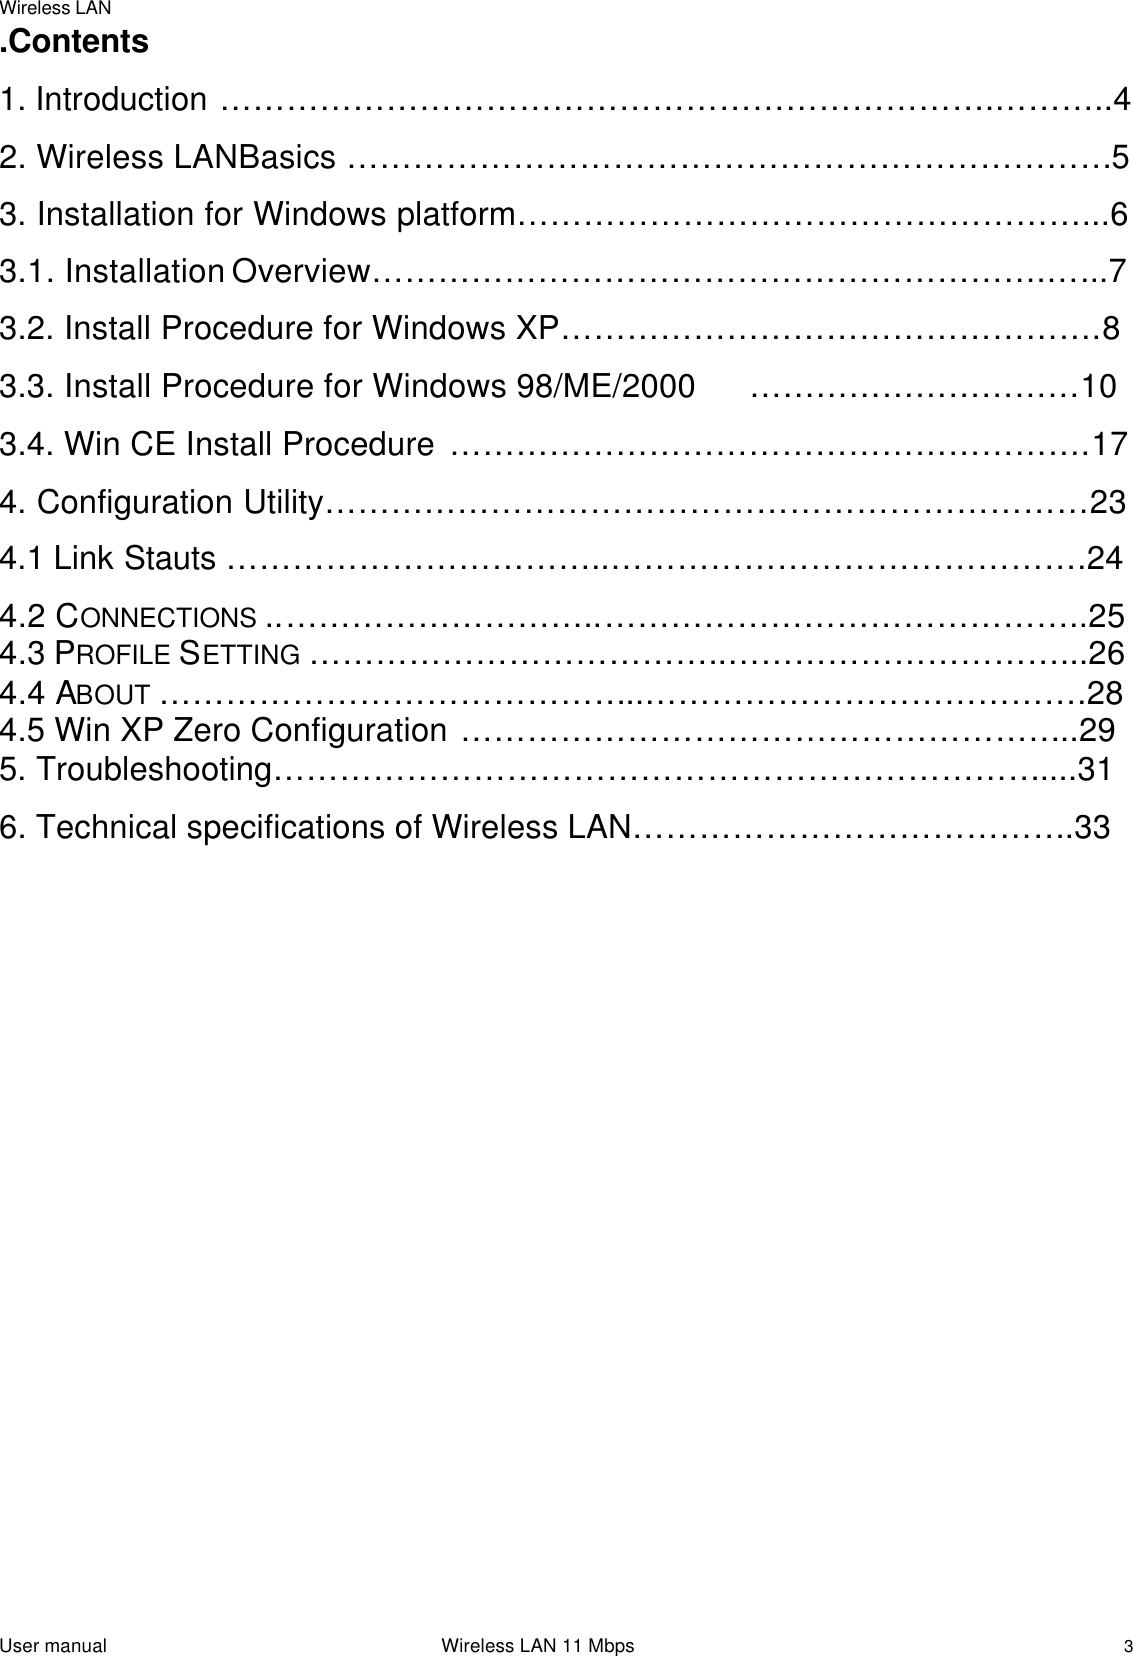 Wireless LANUser manual                                                                 Wireless LAN 11 Mbps3.Contents1. Introduction …………………………………………………………….………..42. Wireless LANBasics ……………………………………………………………53. Installation for Windows platform……………………………………………...63.1. Installation Overview…………………………………………………….…...73.2. Install Procedure for Windows XP………………………………………….83.3. Install Procedure for Windows 98/ME/2000 …………………………103.4. Win CE Install Procedure ………………………………………………….174. Configuration Utility……………………………………………………………234.1 Link Stauts ……………………………..…………………………………….244.2 CONNECTIONS ..………………………..……………………………………..254.3 PROFILE SETTING ………………………………..…………………………...264.4 ABOUT ……………………………………..………………………………….284.5 Win XP Zero Configuration ………………………………………………..295. Troubleshooting……………………………………………………………....316. Technical specifications of Wireless LAN………………………………….33